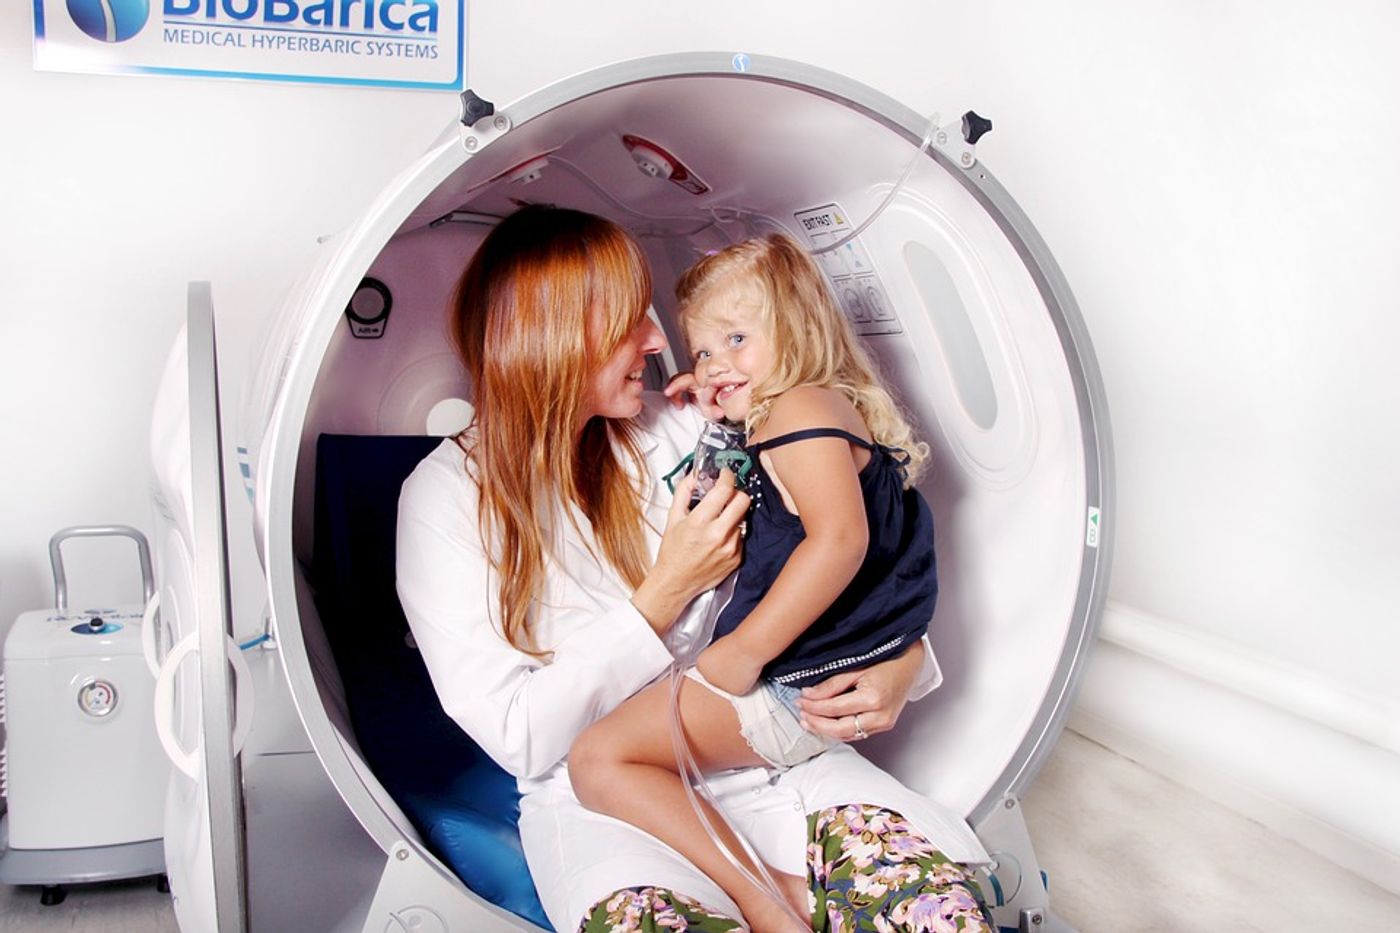 Could lithium treatment hold hope for children who have gone through radiation? Photo: Pixabay